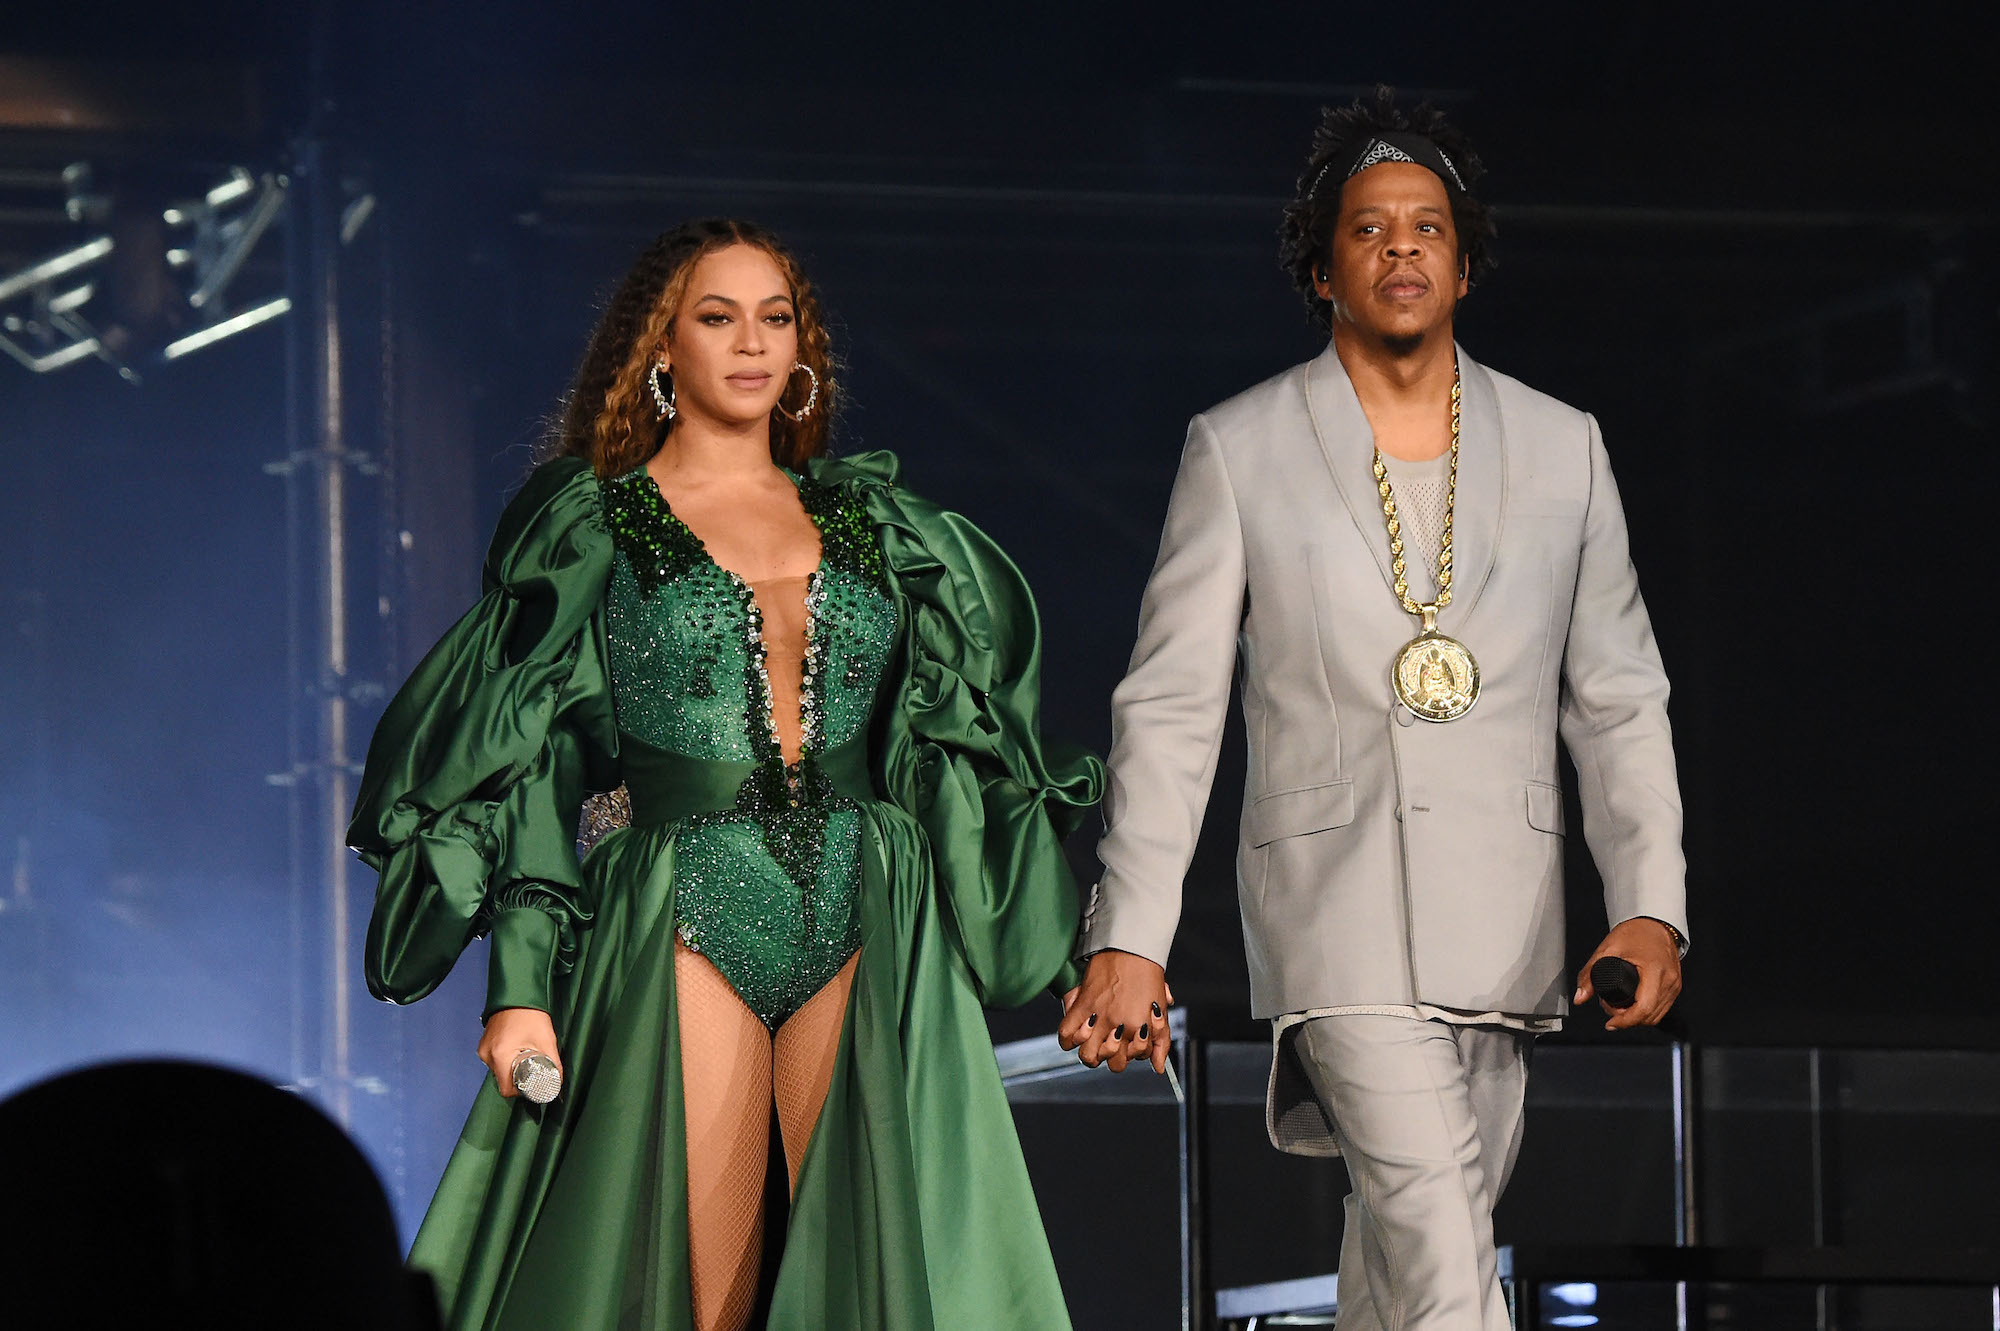 Beyoncé and Jay-Z smiling on stage, holding hands